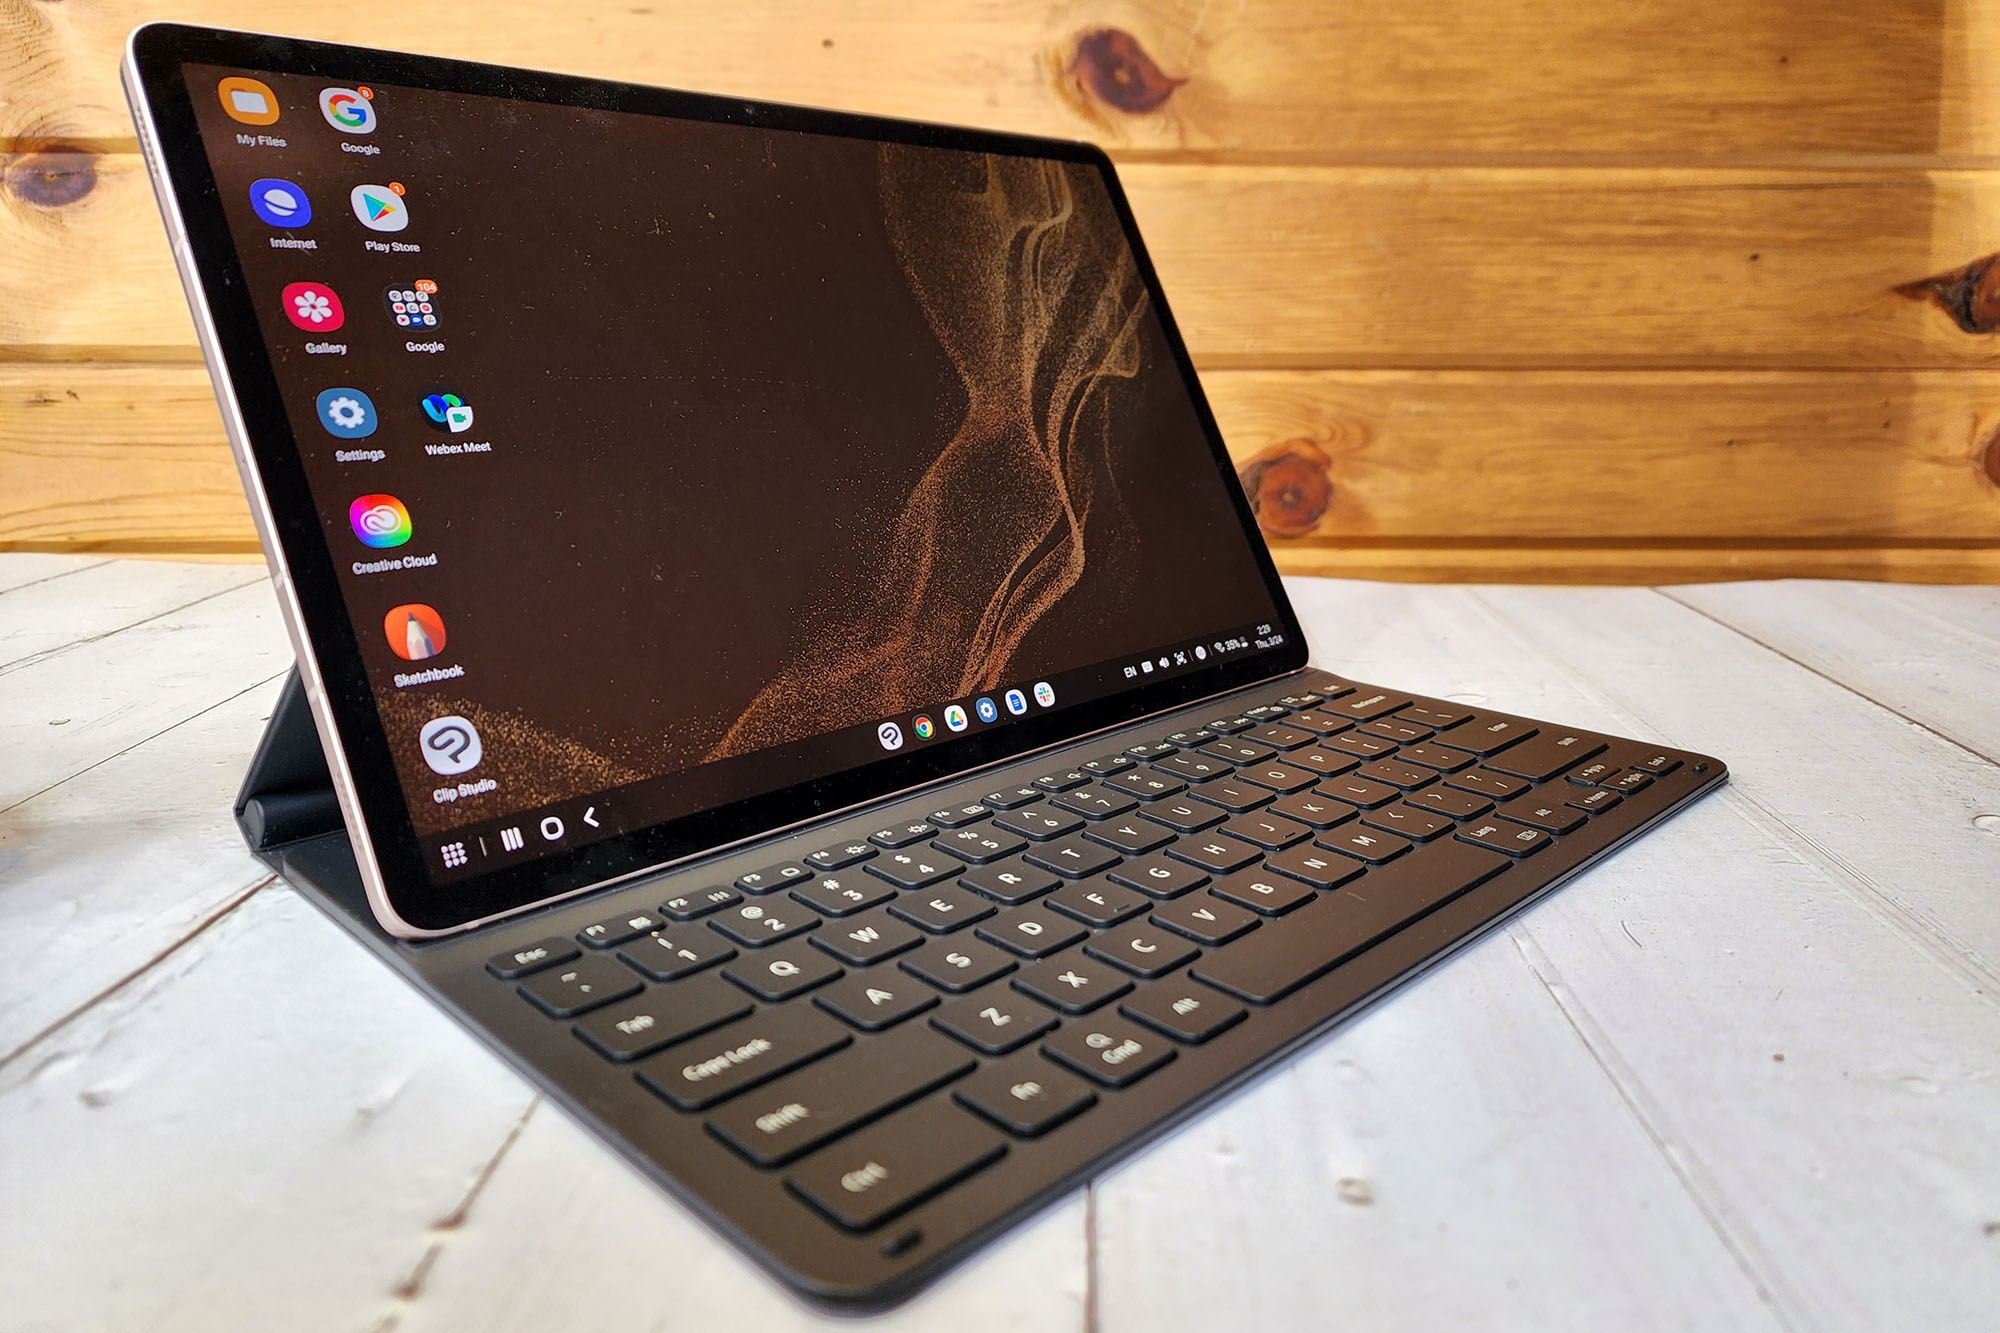 Samsung Galaxy Tab S8 Plus review: Best Android tablet despite